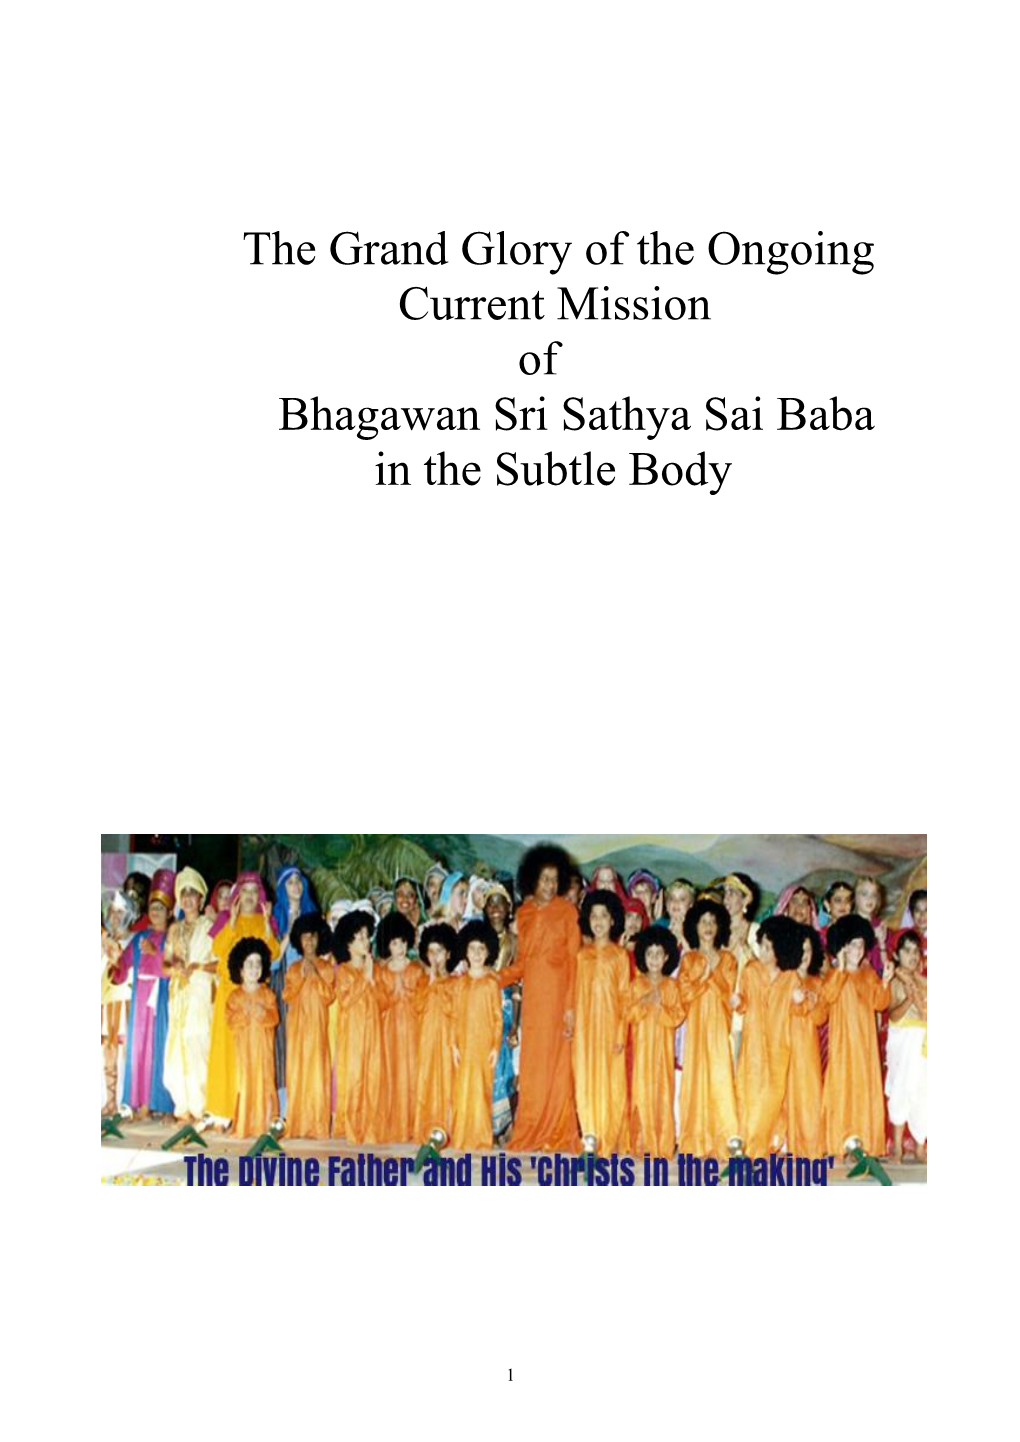 The Grand Glory of the Ongoing Current Mission of Bhagawan Sri Sathya Sai Baba in the Subtle Body